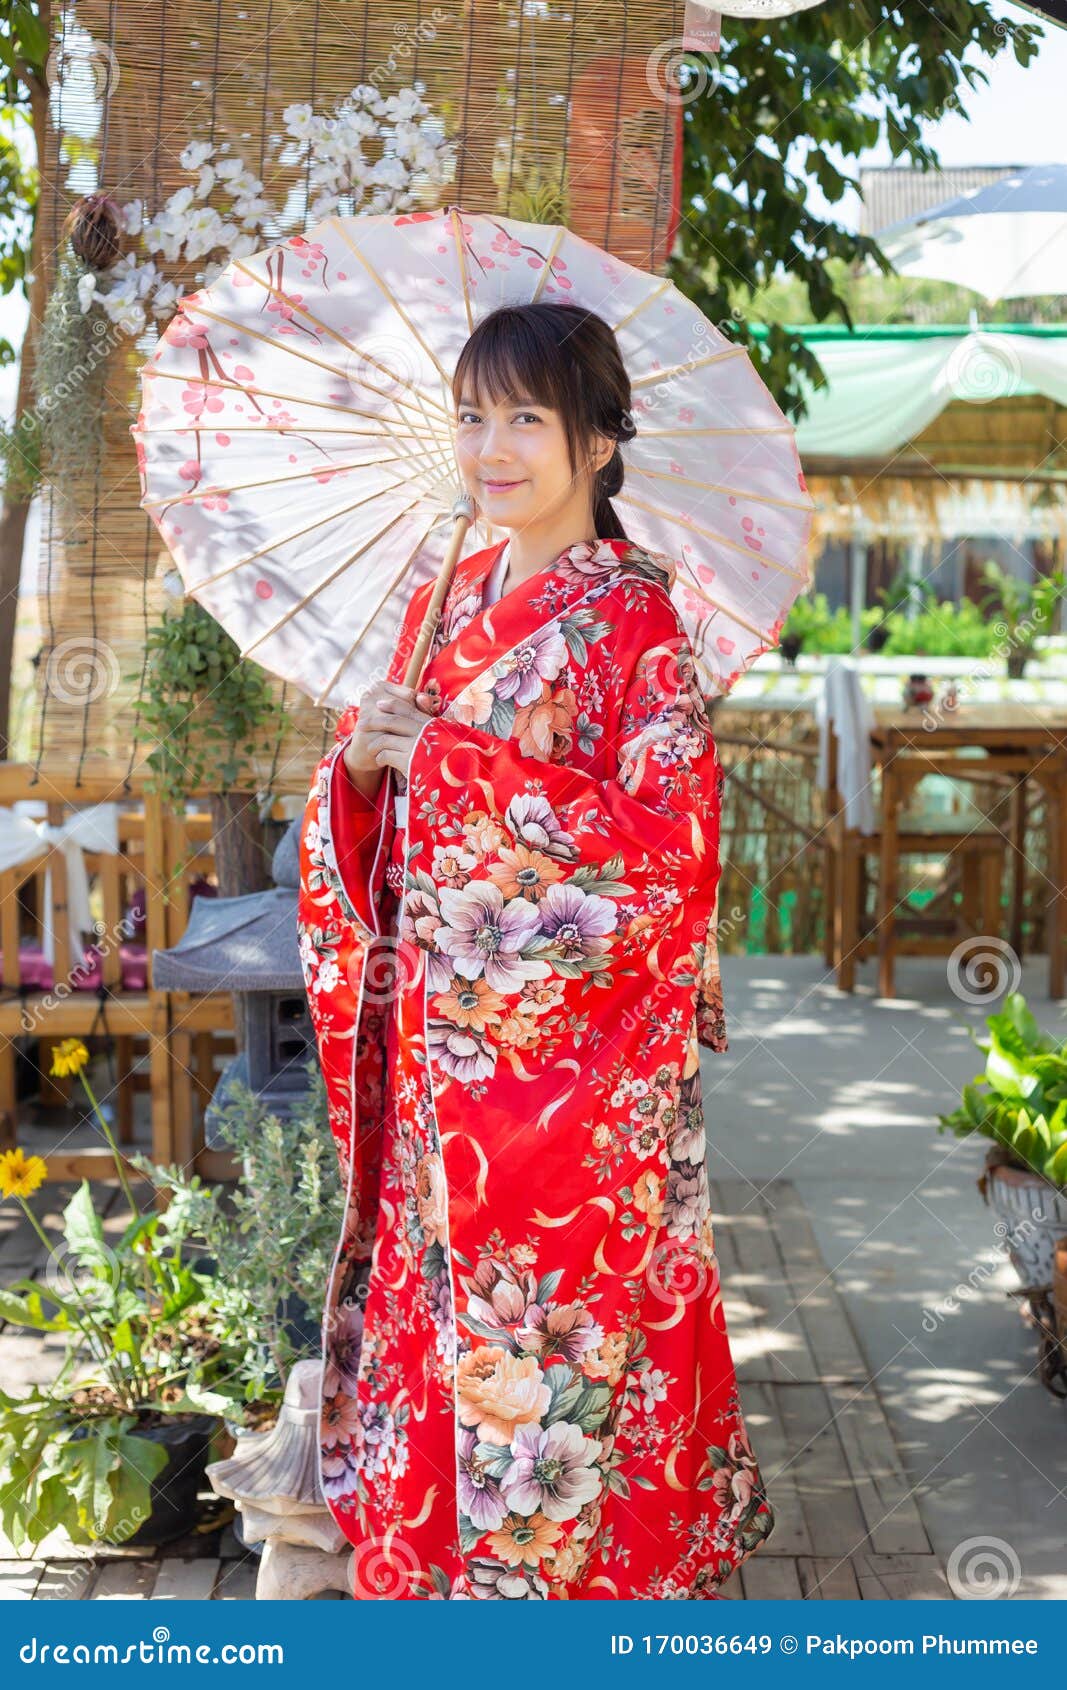 Asian Girl Wearing Traditional Japanese Dress Vector Image | Hot Sex ...